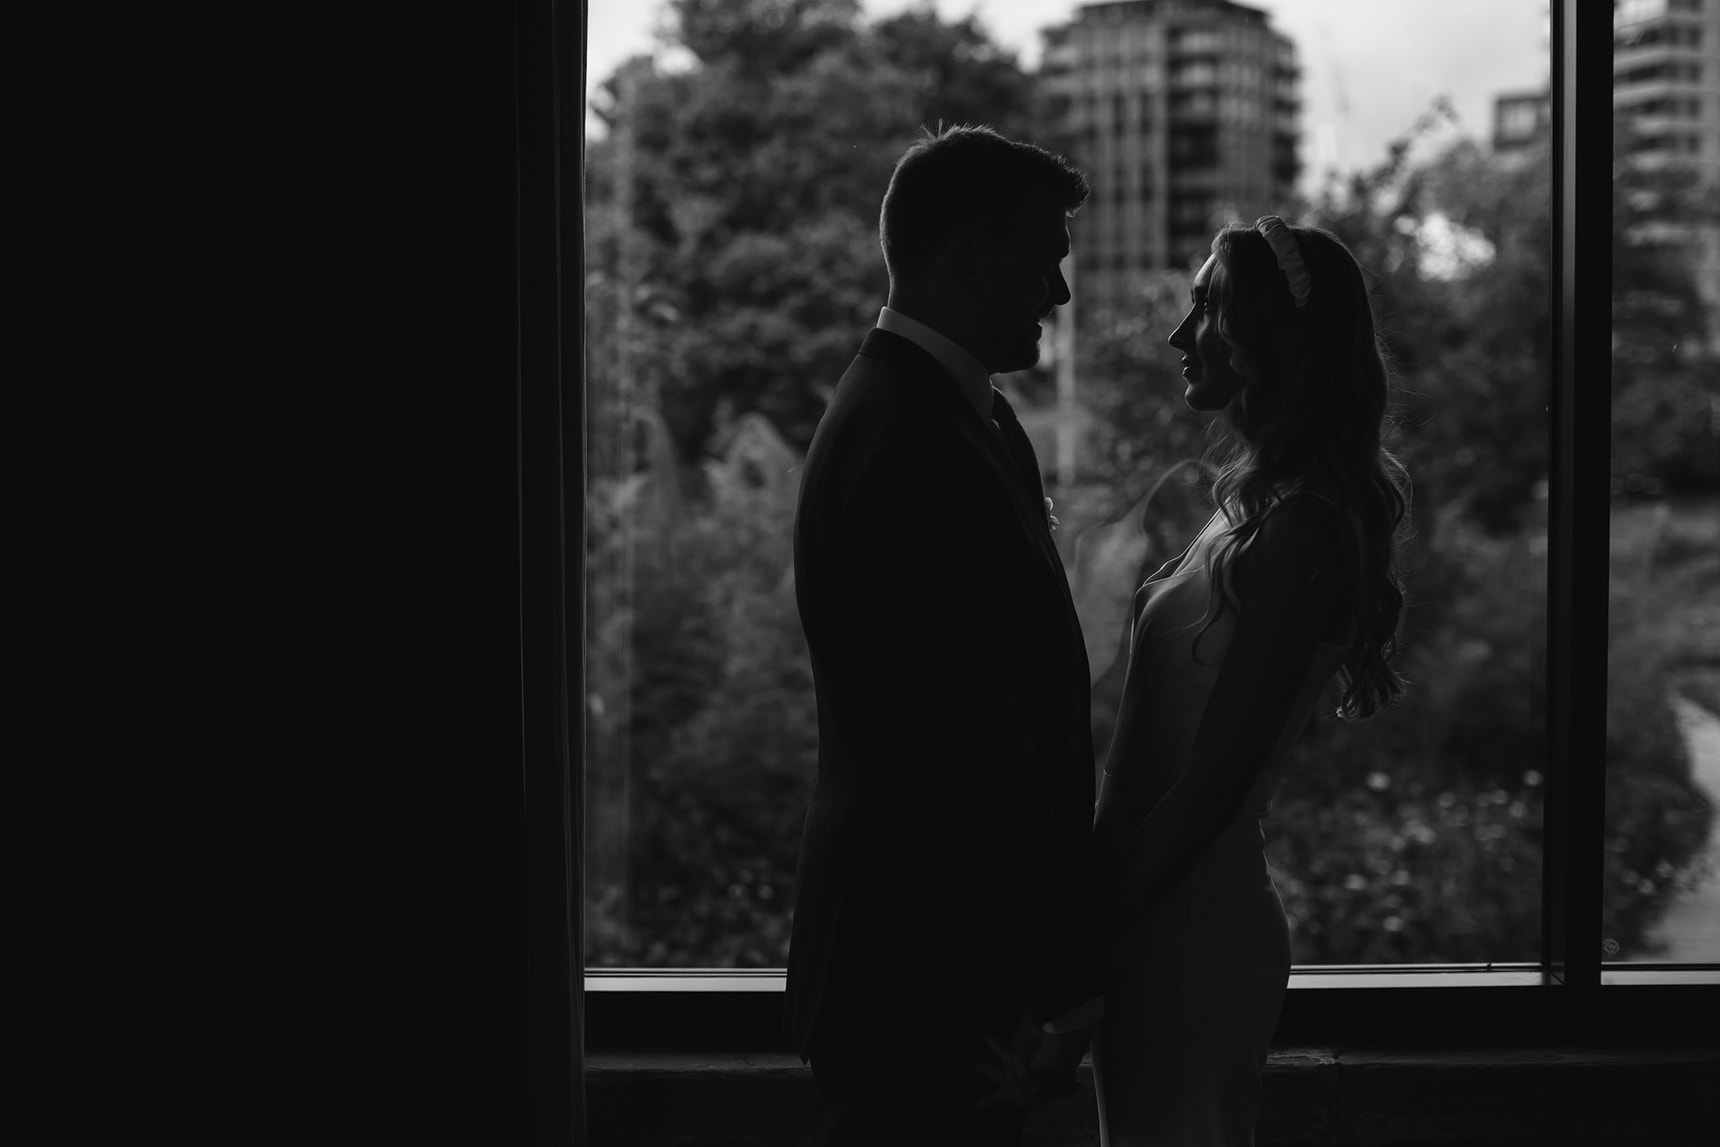 Black and white wedding portrait silhouette in front of a window with London skyline in the background